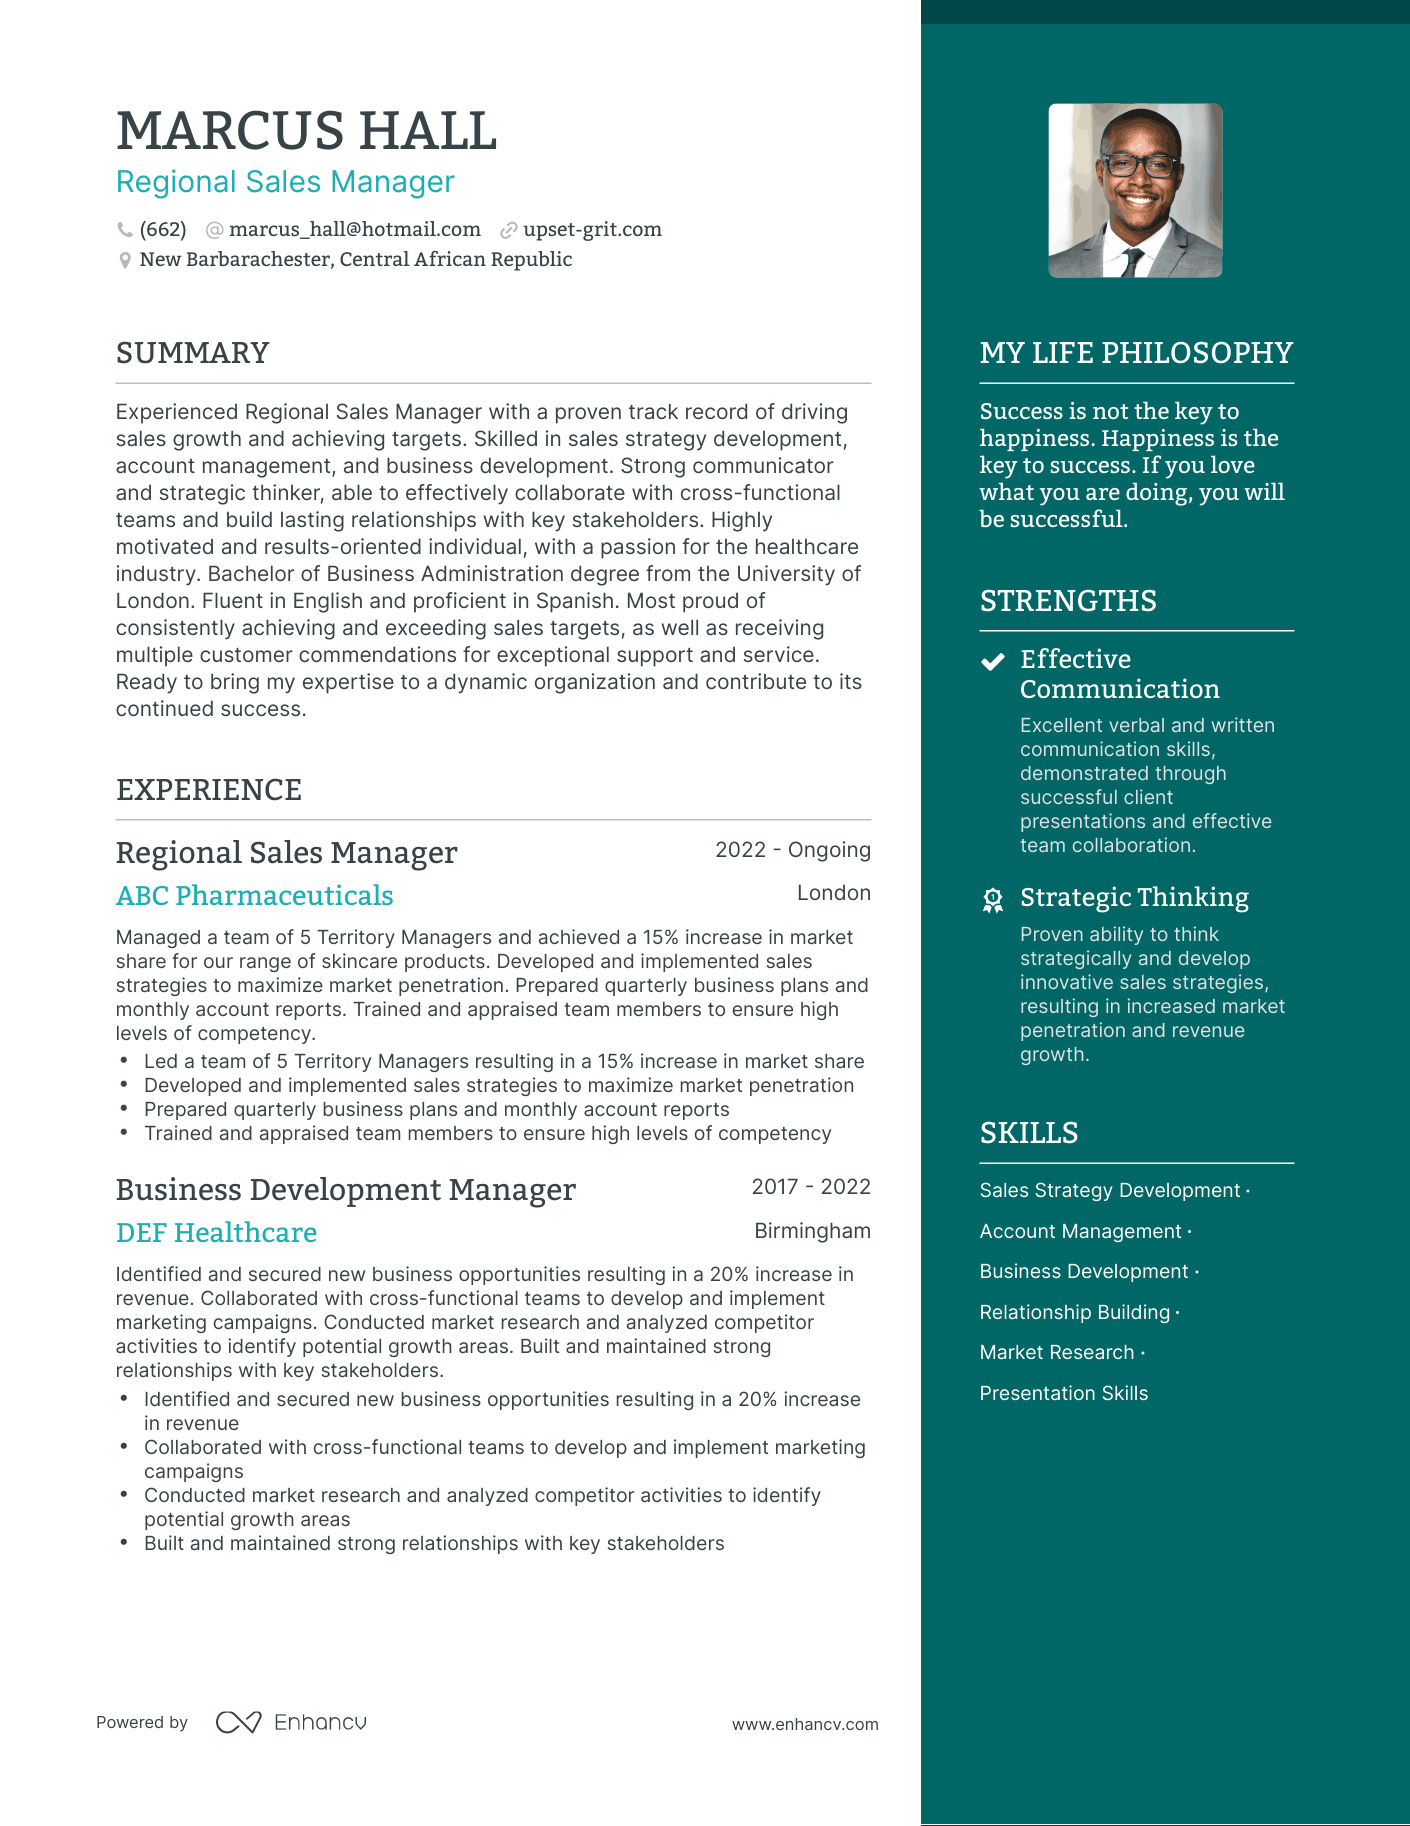 Regional Sales Manager resume example